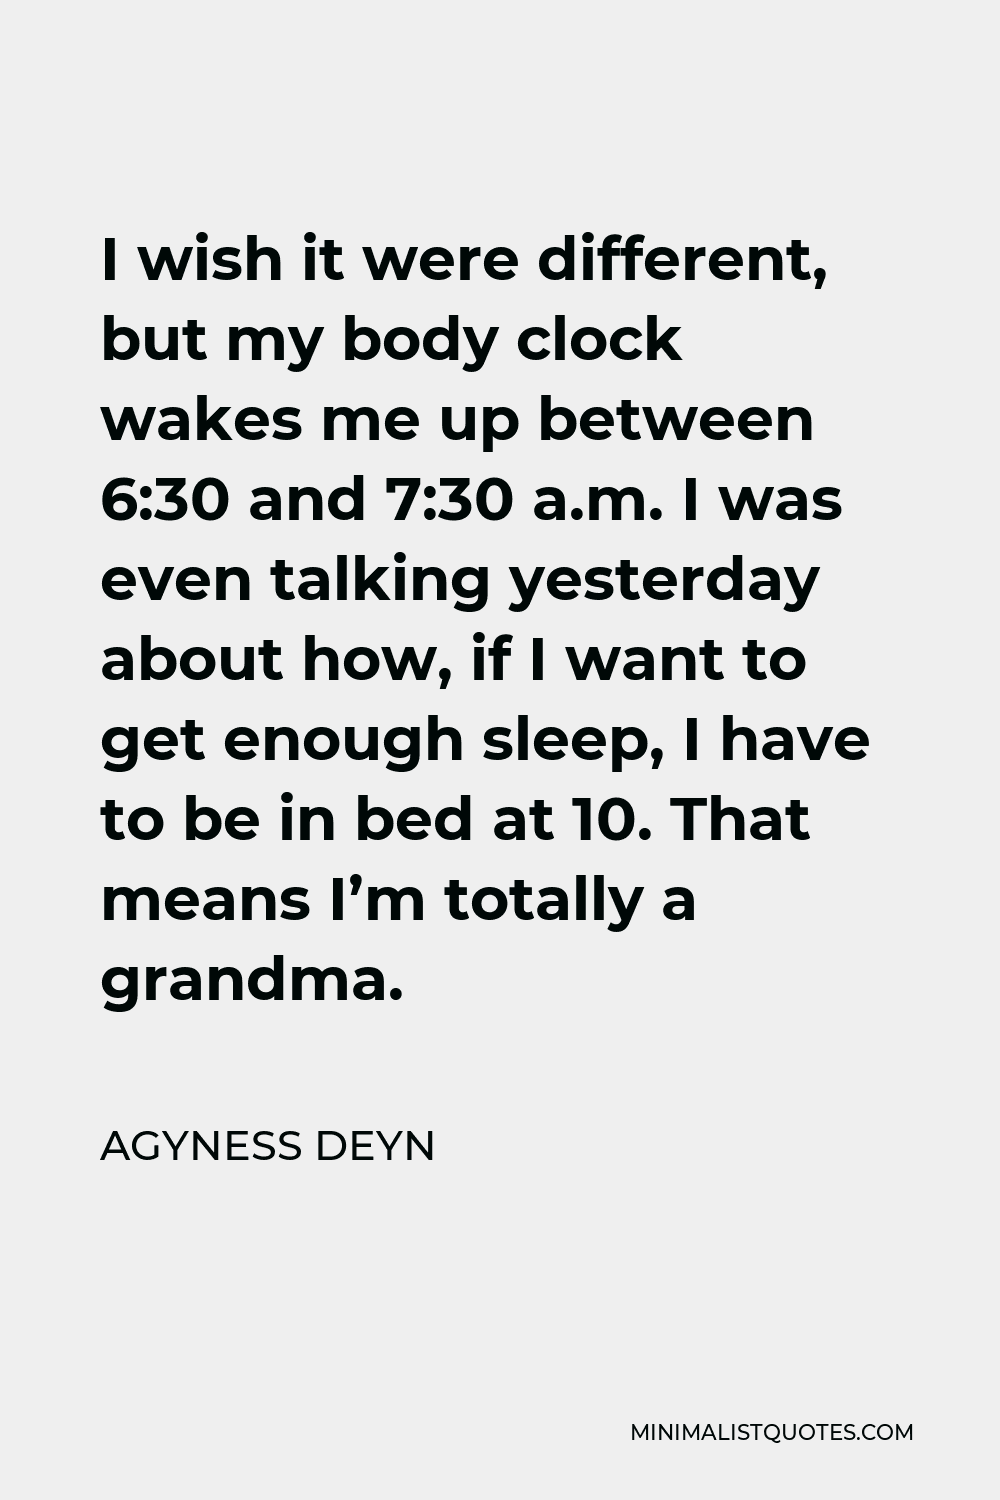 Agyness Deyn Quote - I wish it were different, but my body clock wakes me up between 6:30 and 7:30 a.m. I was even talking yesterday about how, if I want to get enough sleep, I have to be in bed at 10. That means I’m totally a grandma.